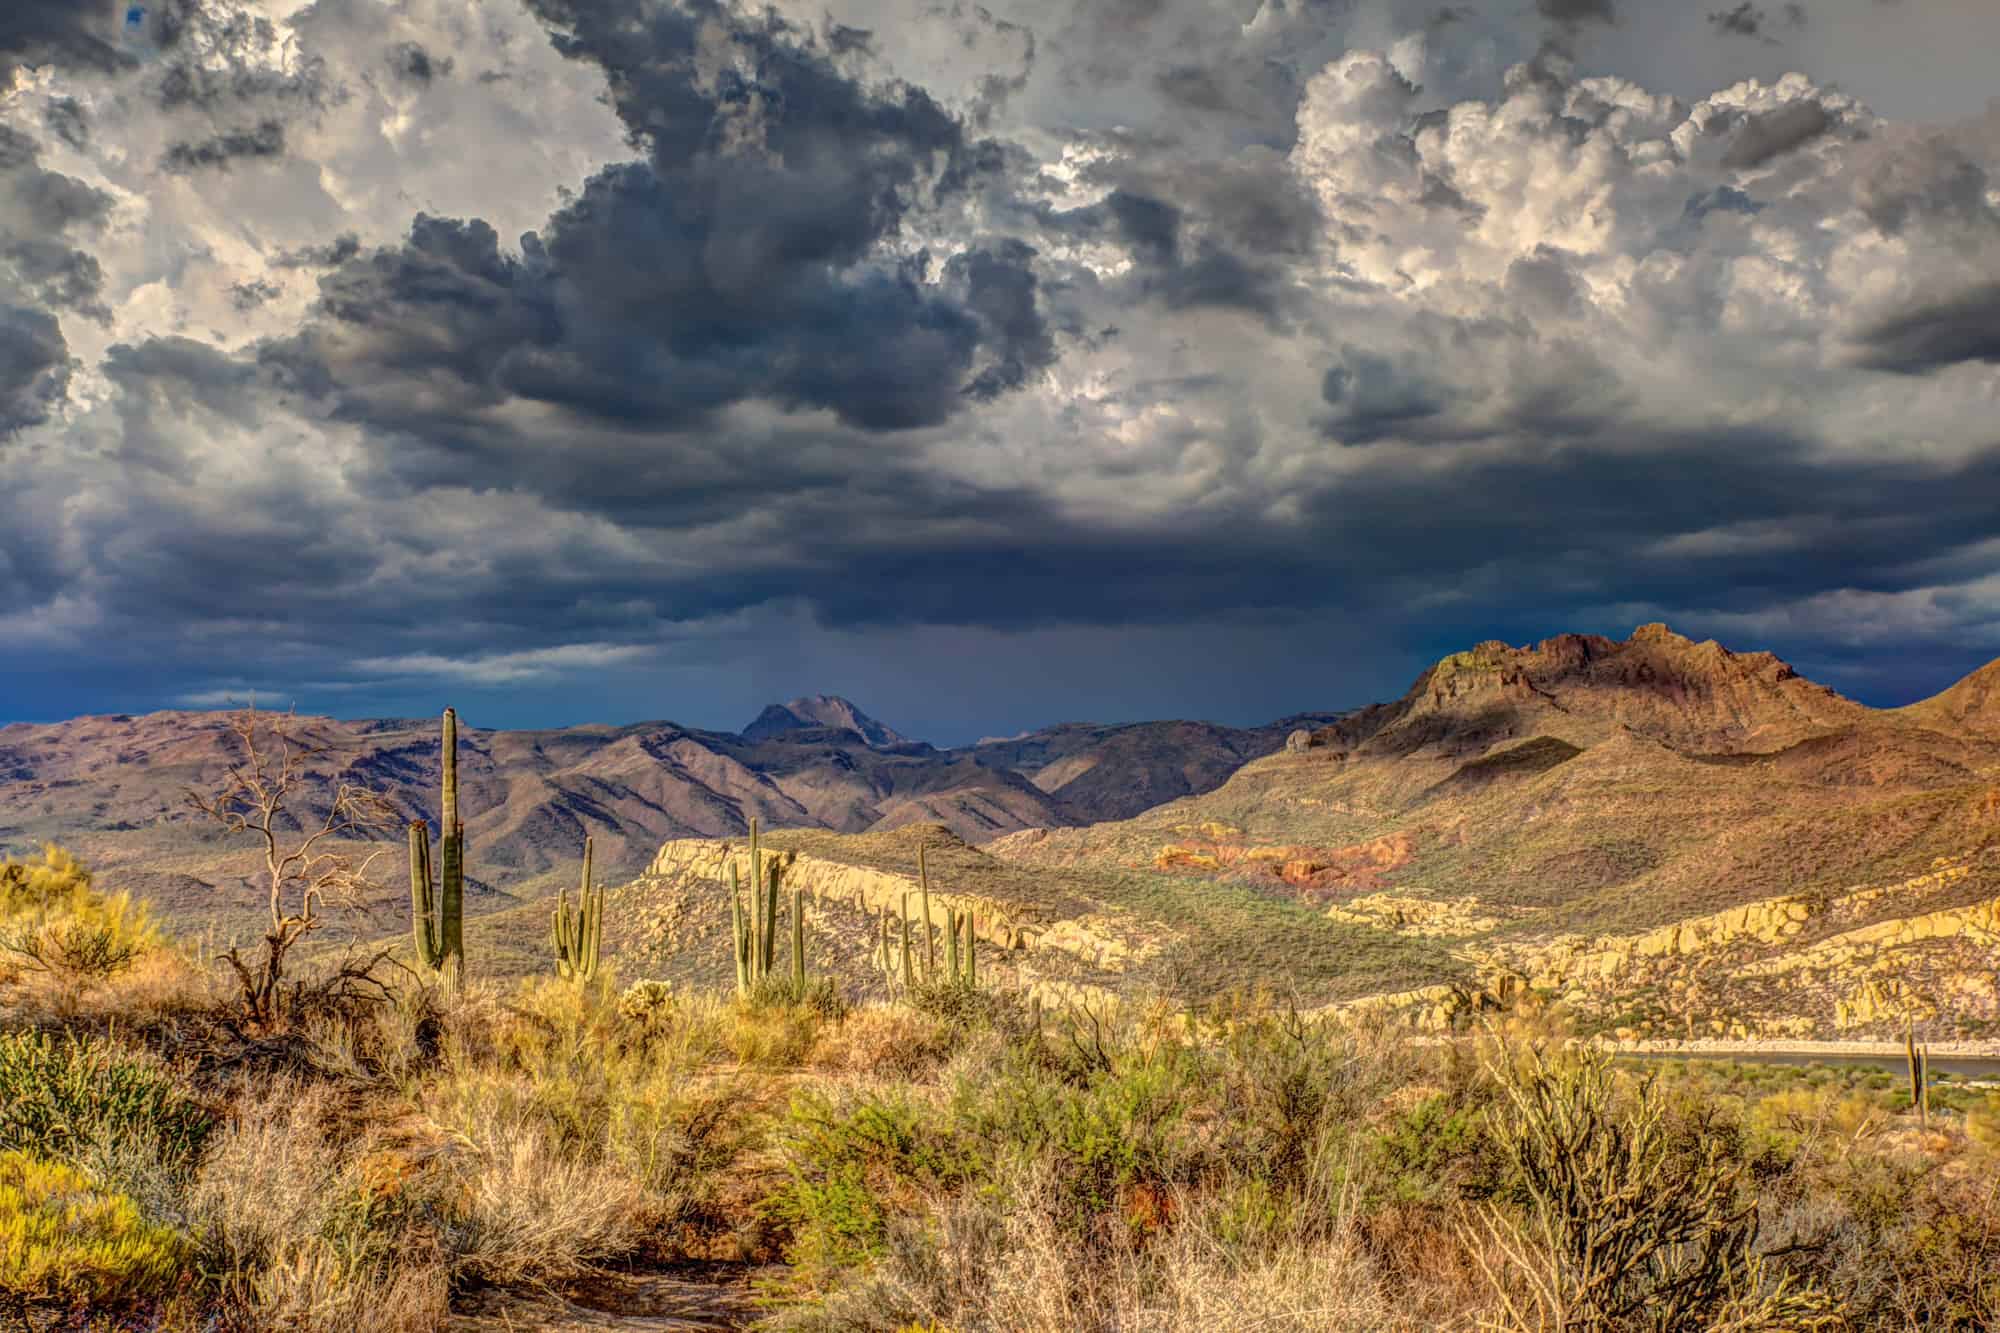 a tucson landscape scene with sunny foreground desert but storm clouds brewing in the sky above